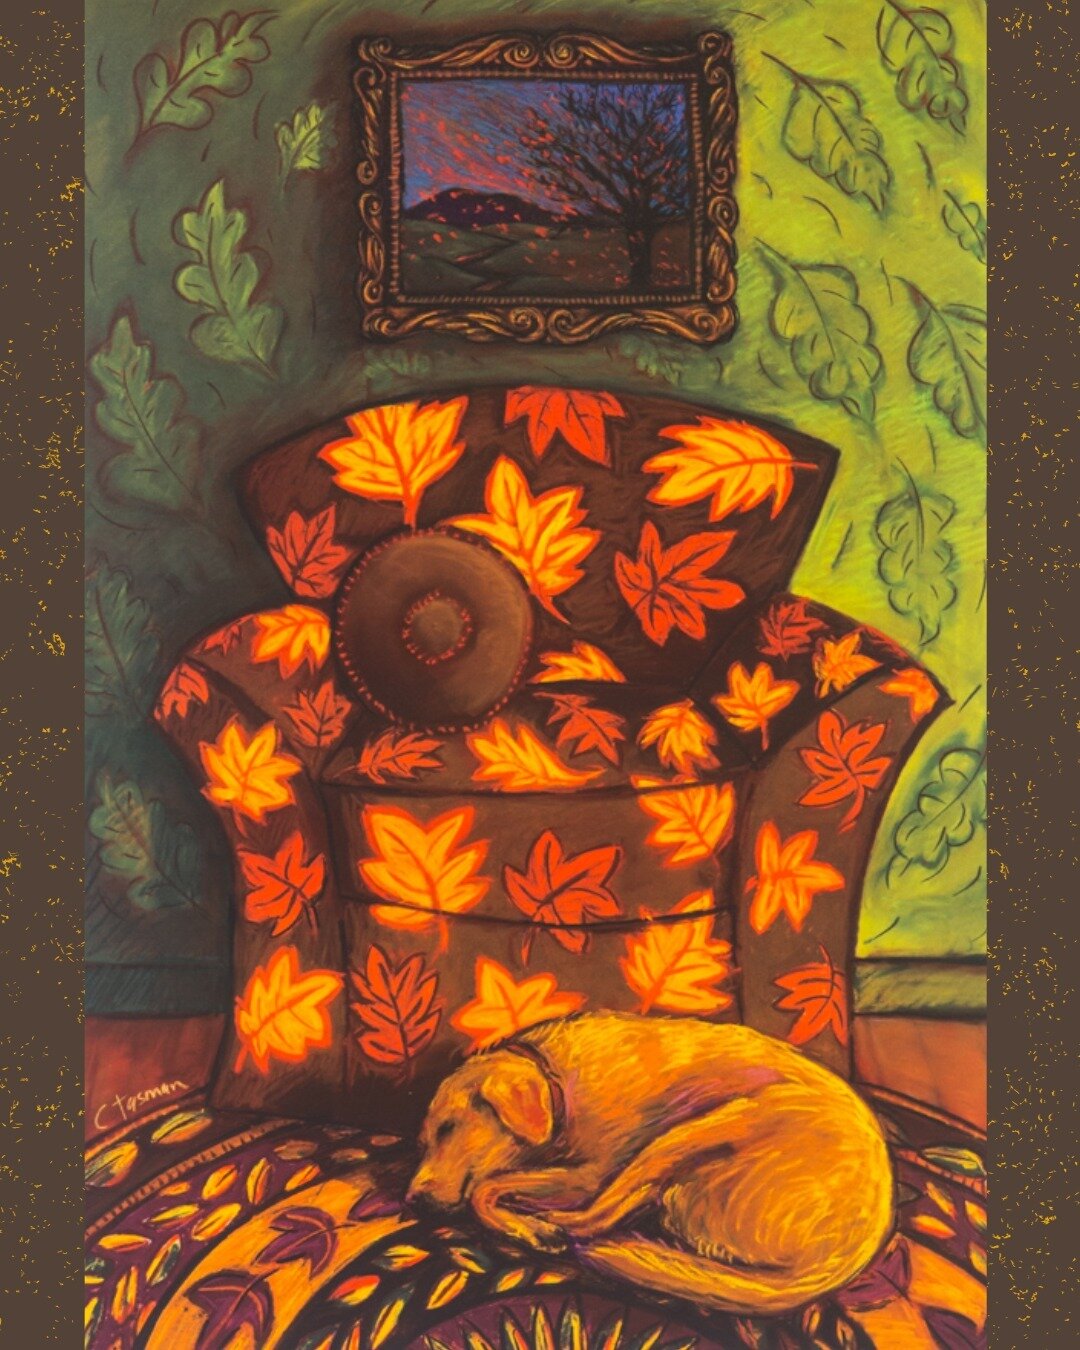 As these icy winter days continue, we hope your home mirrors the comfort and warmth of this vintage Corvallis Fall Festival poster by artist @ctasman, complete with cozy armchair and a furry friend close by. Stay safe and here's hoping for warmer day